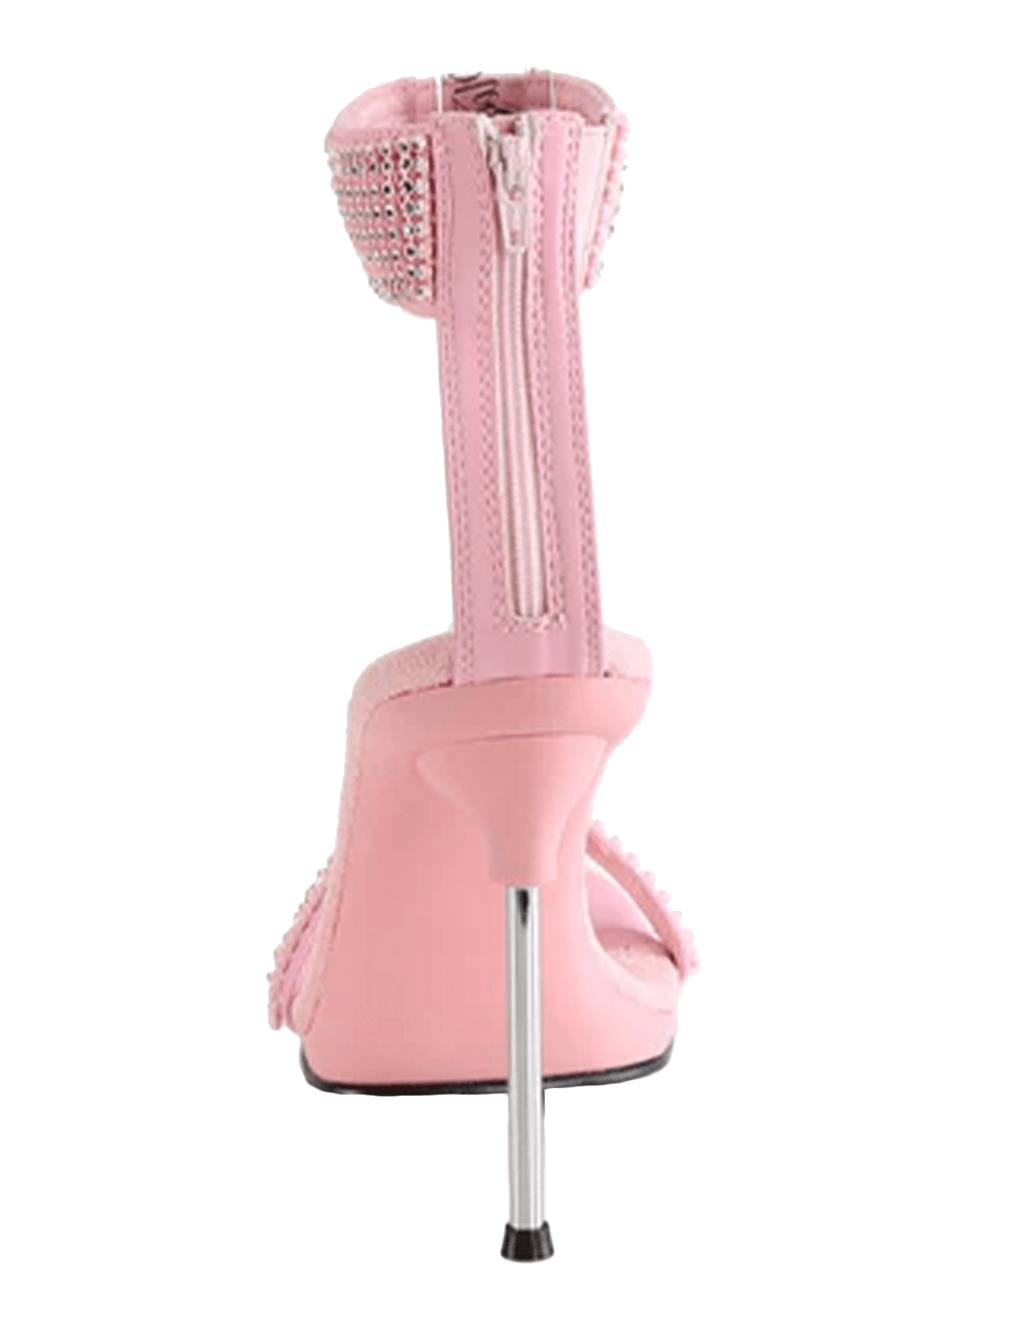 Fabulicious Chic 40 Rhinestone Ankle Cuff Sandal - Baby Pink - Back